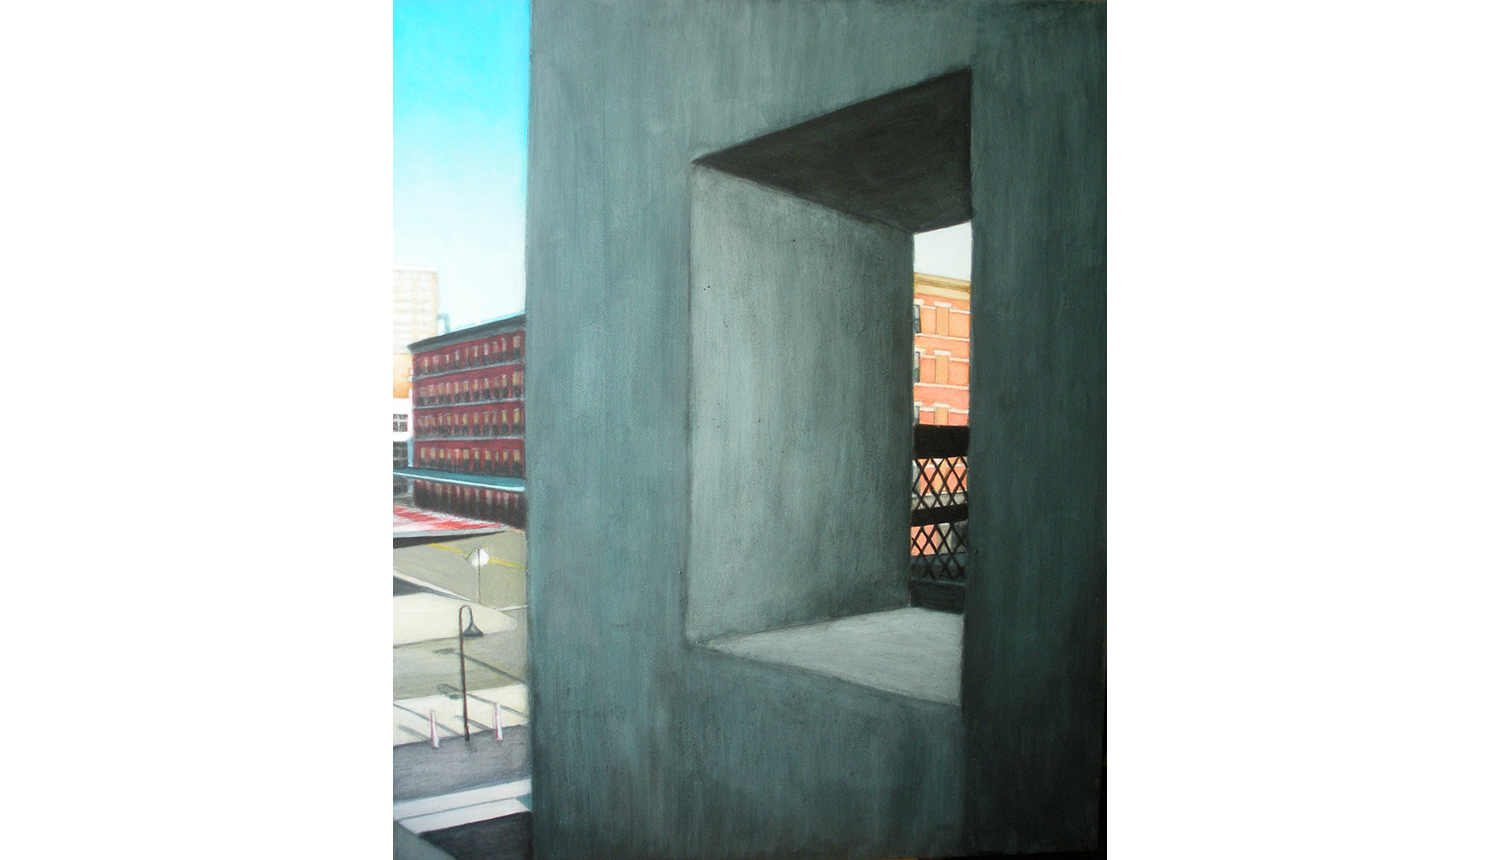   High Line View One,  2010, Acrylic on board, 16 x 20” 